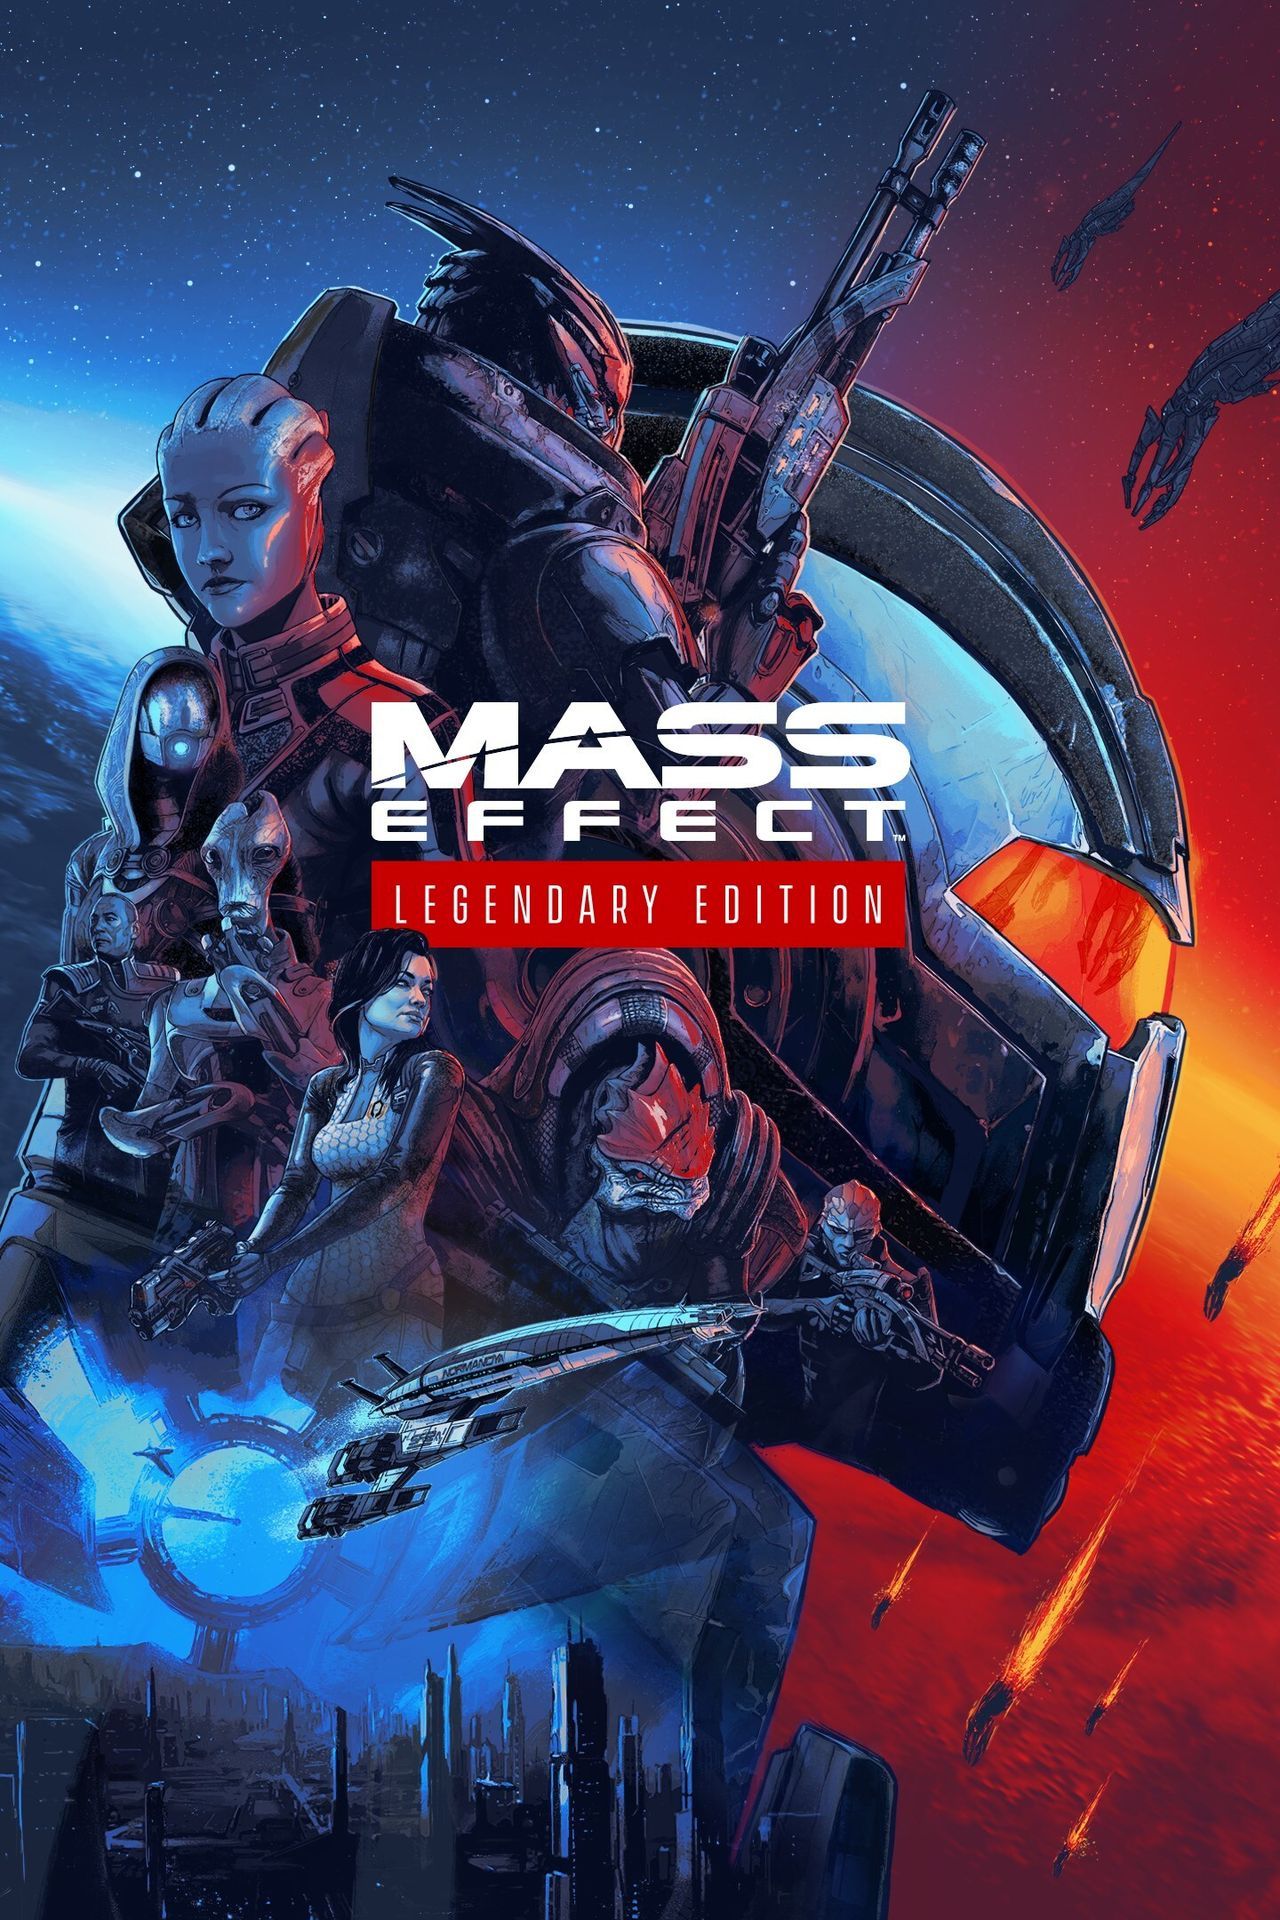 Mass Effect Legendary Edition Videojuego (PS4, PC y Xbox One) Vandal